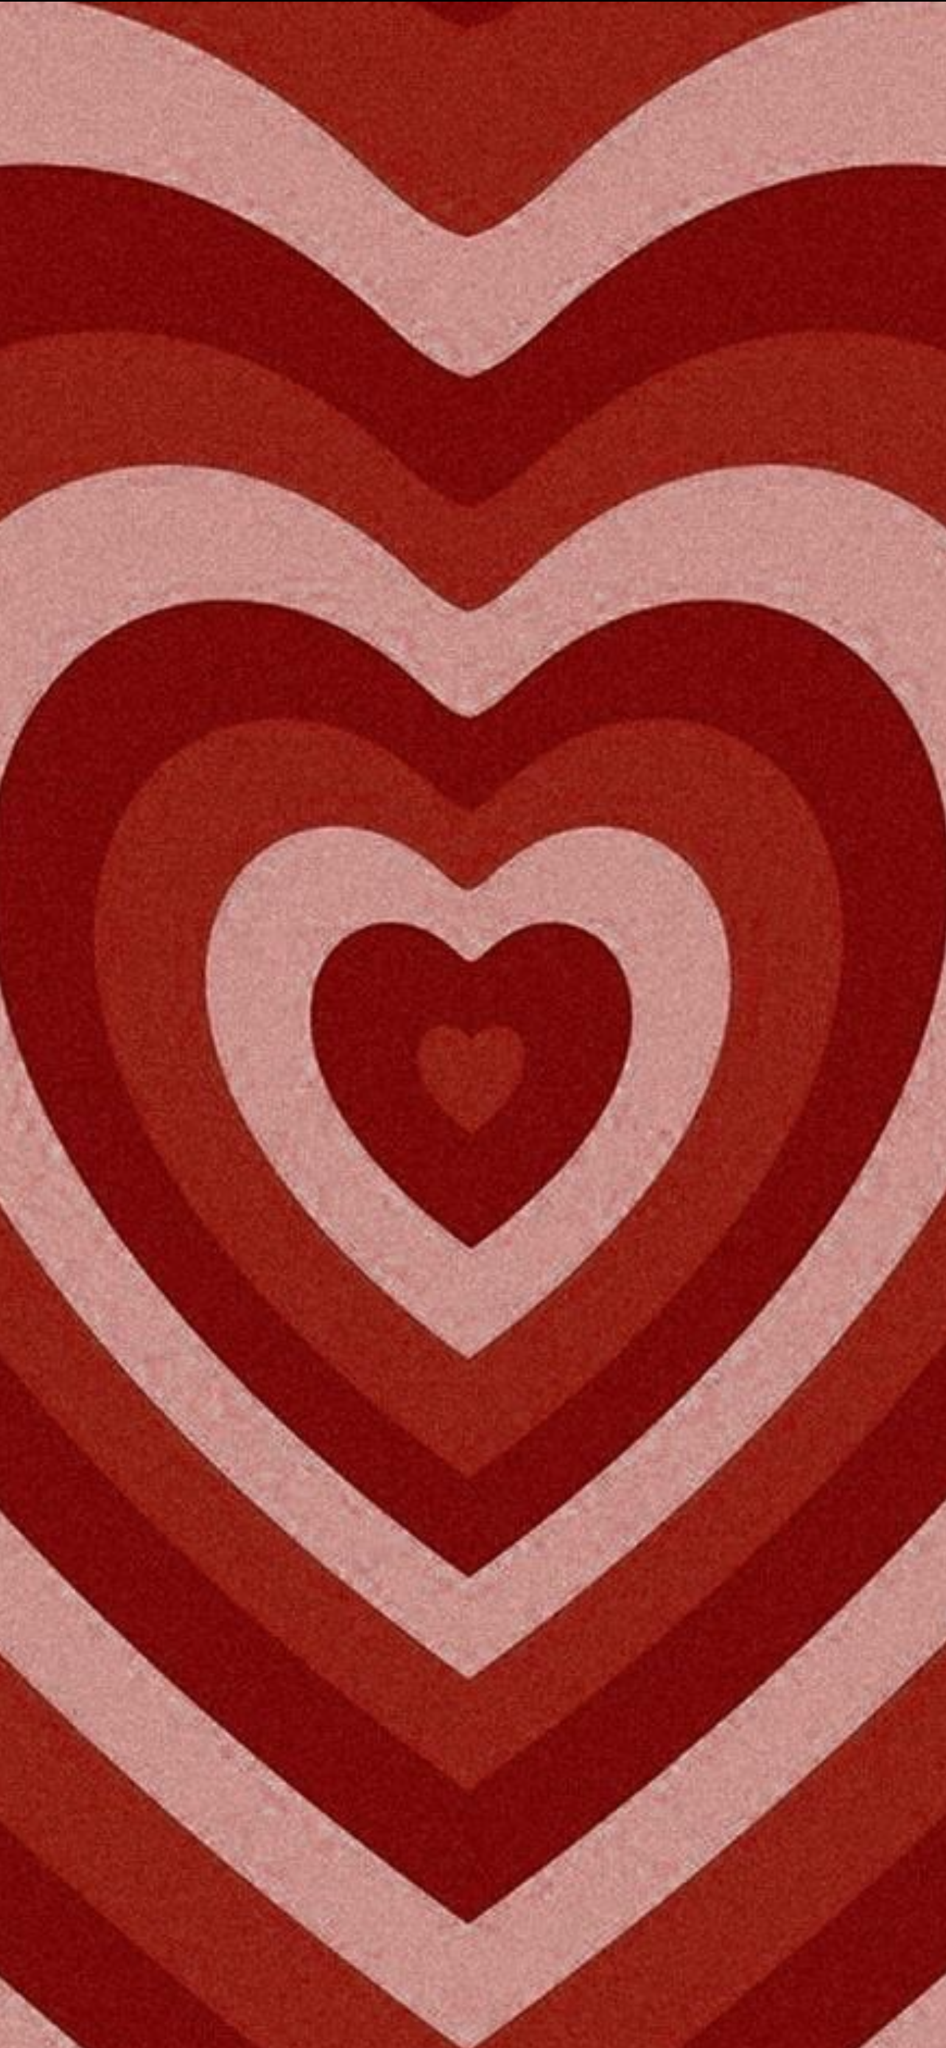 33 Free Valentine's Day Wallpapers and Backgrounds - Picsart Blog